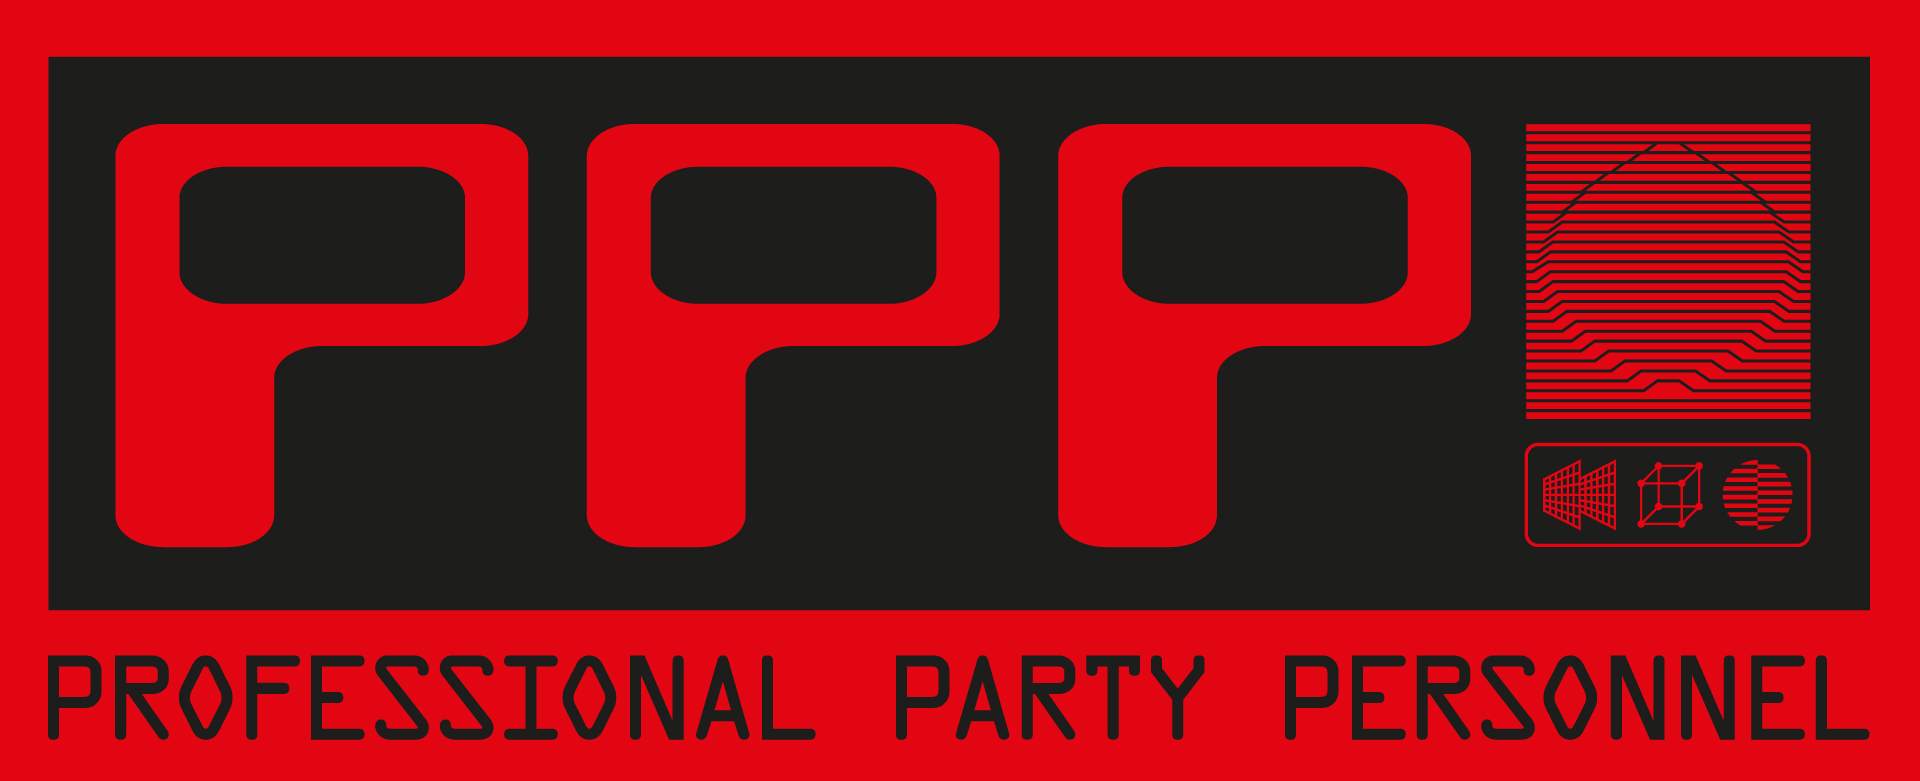 PPP - Professional Party Personnel - Página frontal